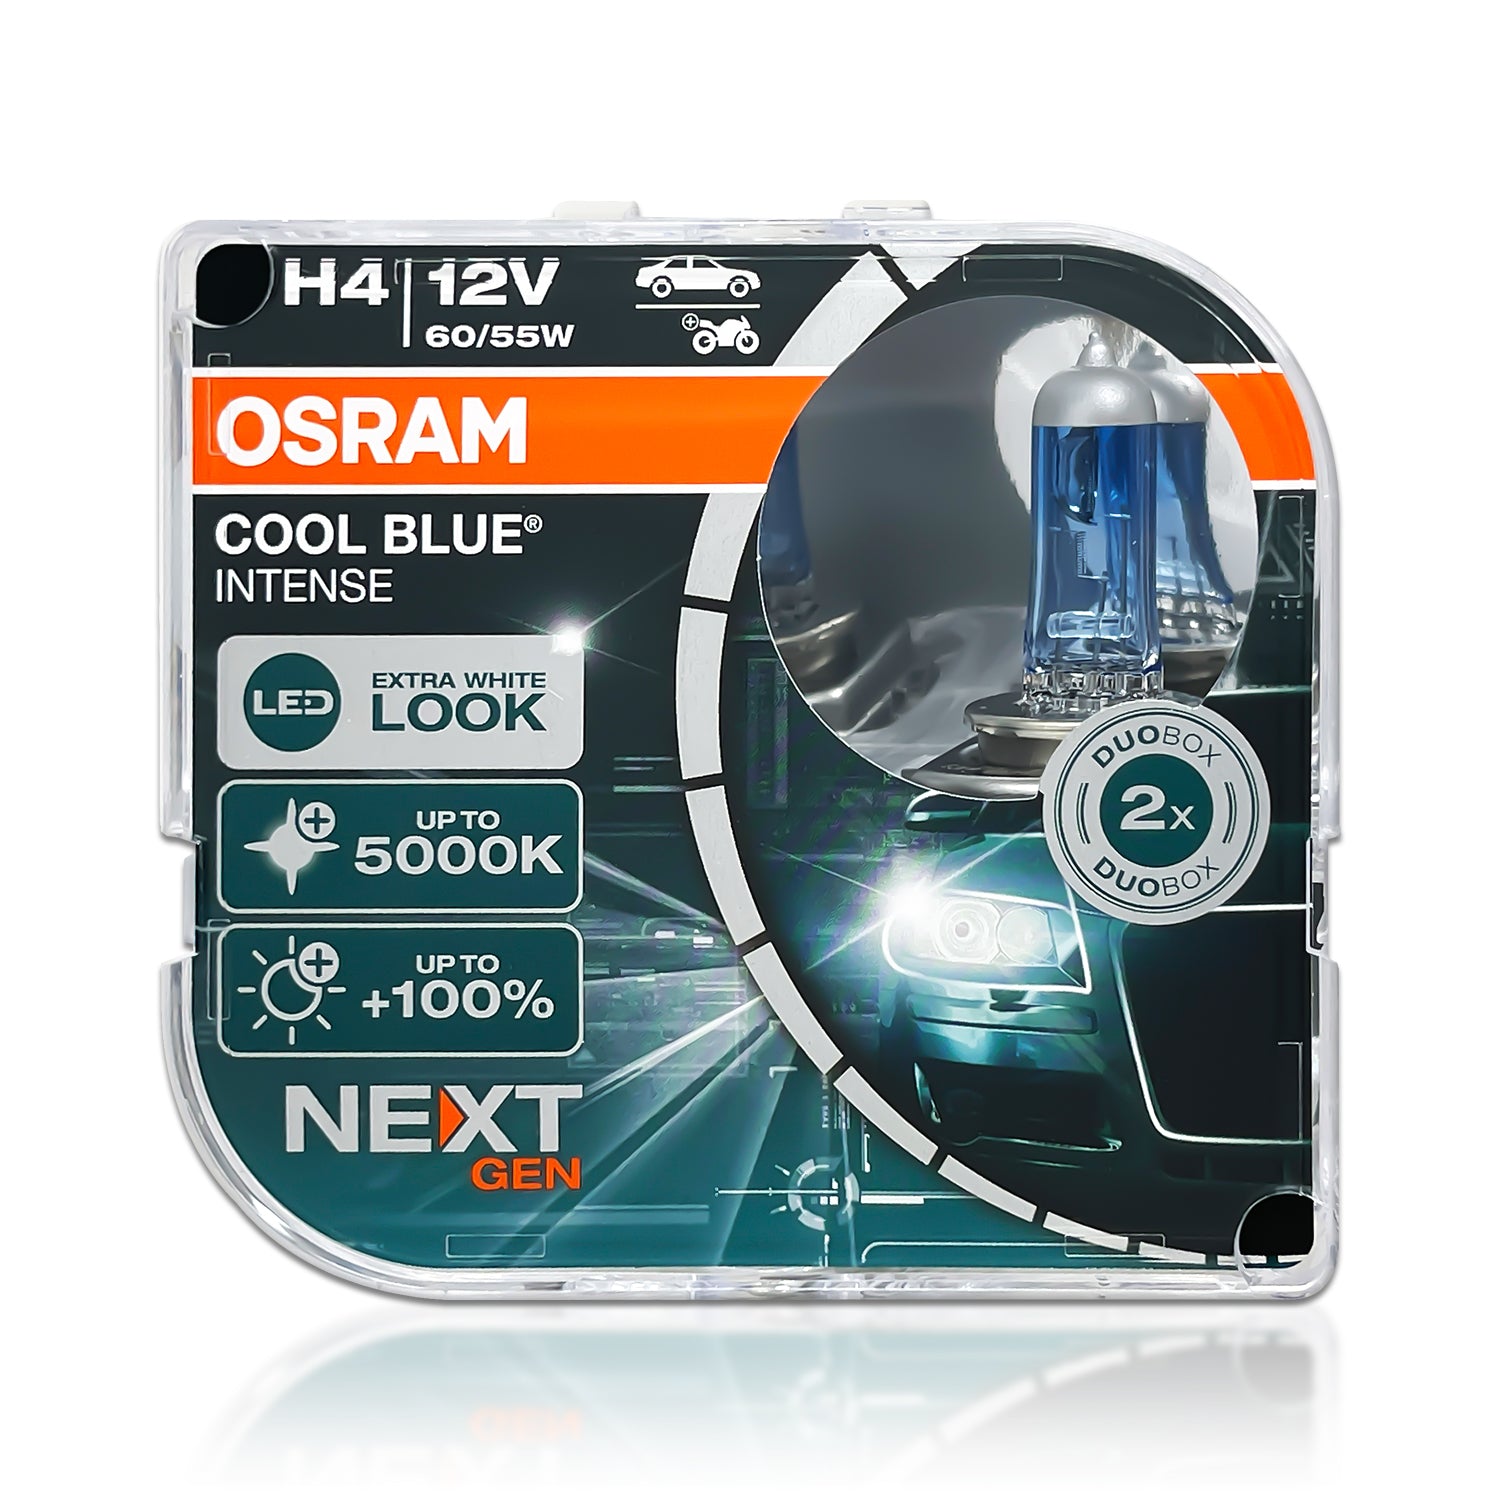 OSRAM COOL BLUE INTENSE XENON VS STOCK. They do make a difference